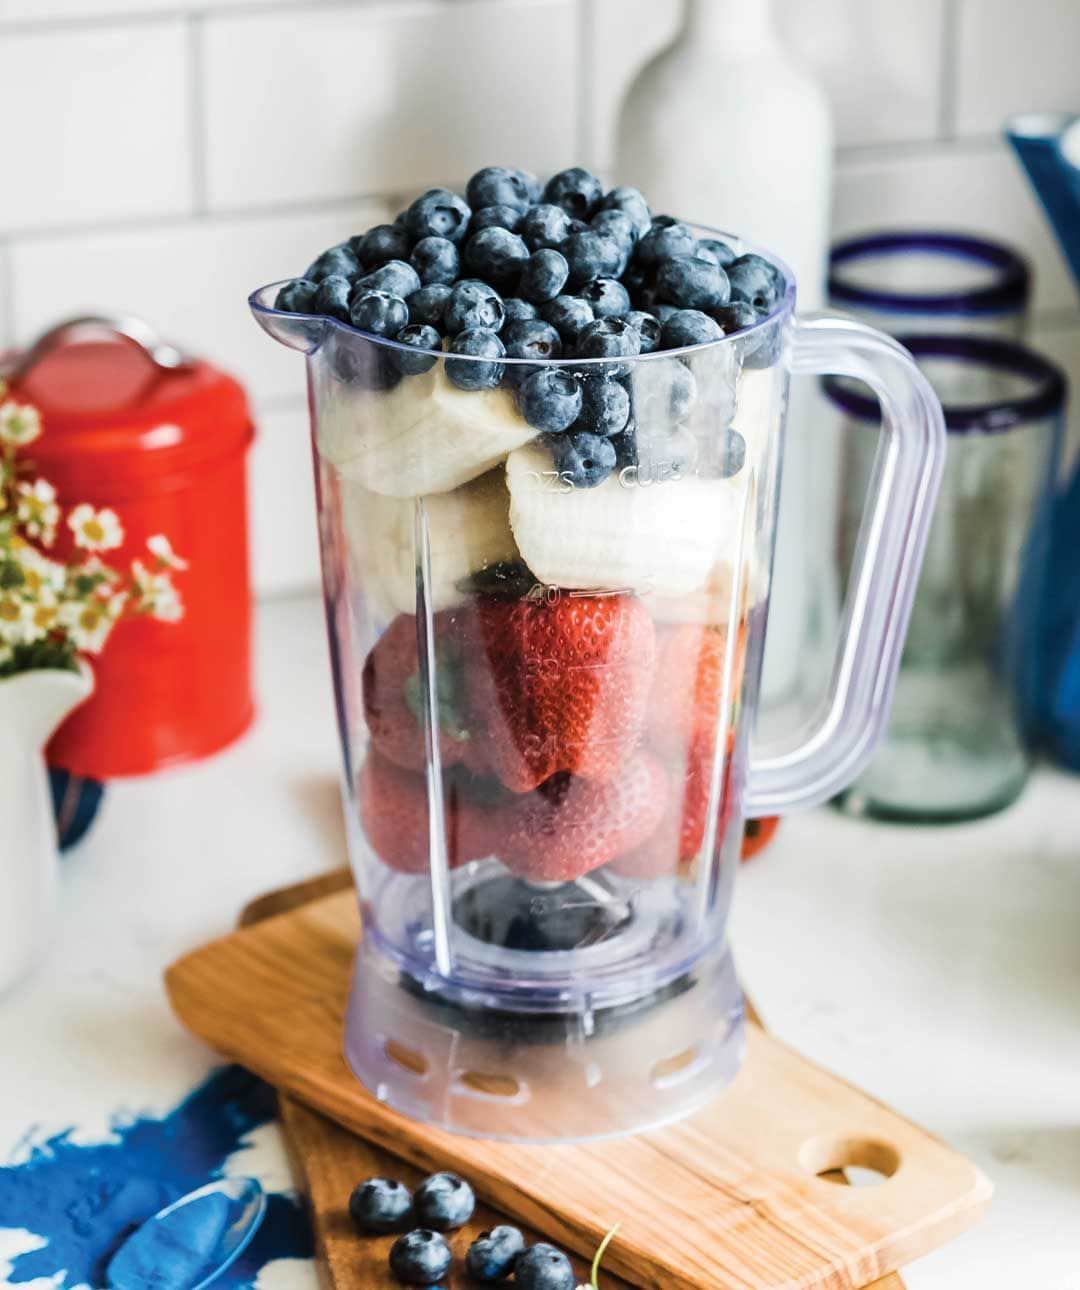 Simple Green Smoothiesのインスタグラム：「Happy 4th of July! 🇺🇸🎉⁣ ⁣ This super fun strawberry blueberry smoothie is layered red, white, and blue for deliciously sweet smoothie treat. Use clear serving glasses for maximum wow factor! ❤💙🤍⁣ ⁣ #healthyeating #healthyrecipes #layeredsmoothie #healthyfood #simplegreensmoothies #strawberryblueberry #cleanrecipes #fourthofjuly #cleanRecipe #healthychoice」